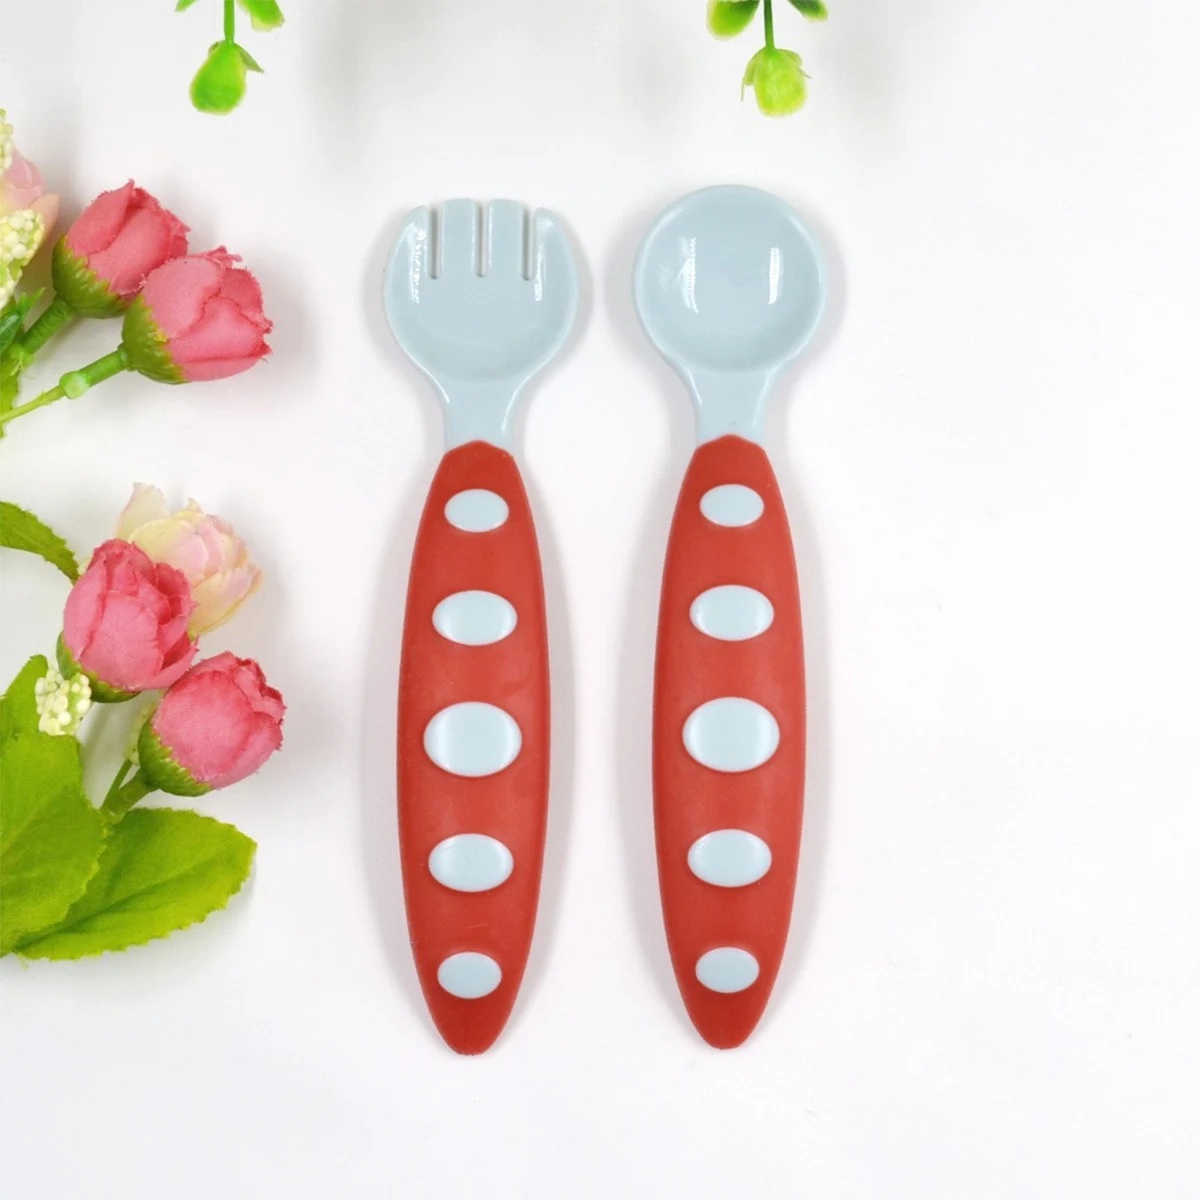 

Baby cutlery set 14X3.2cm-1 (each set has one fork and one spoon)